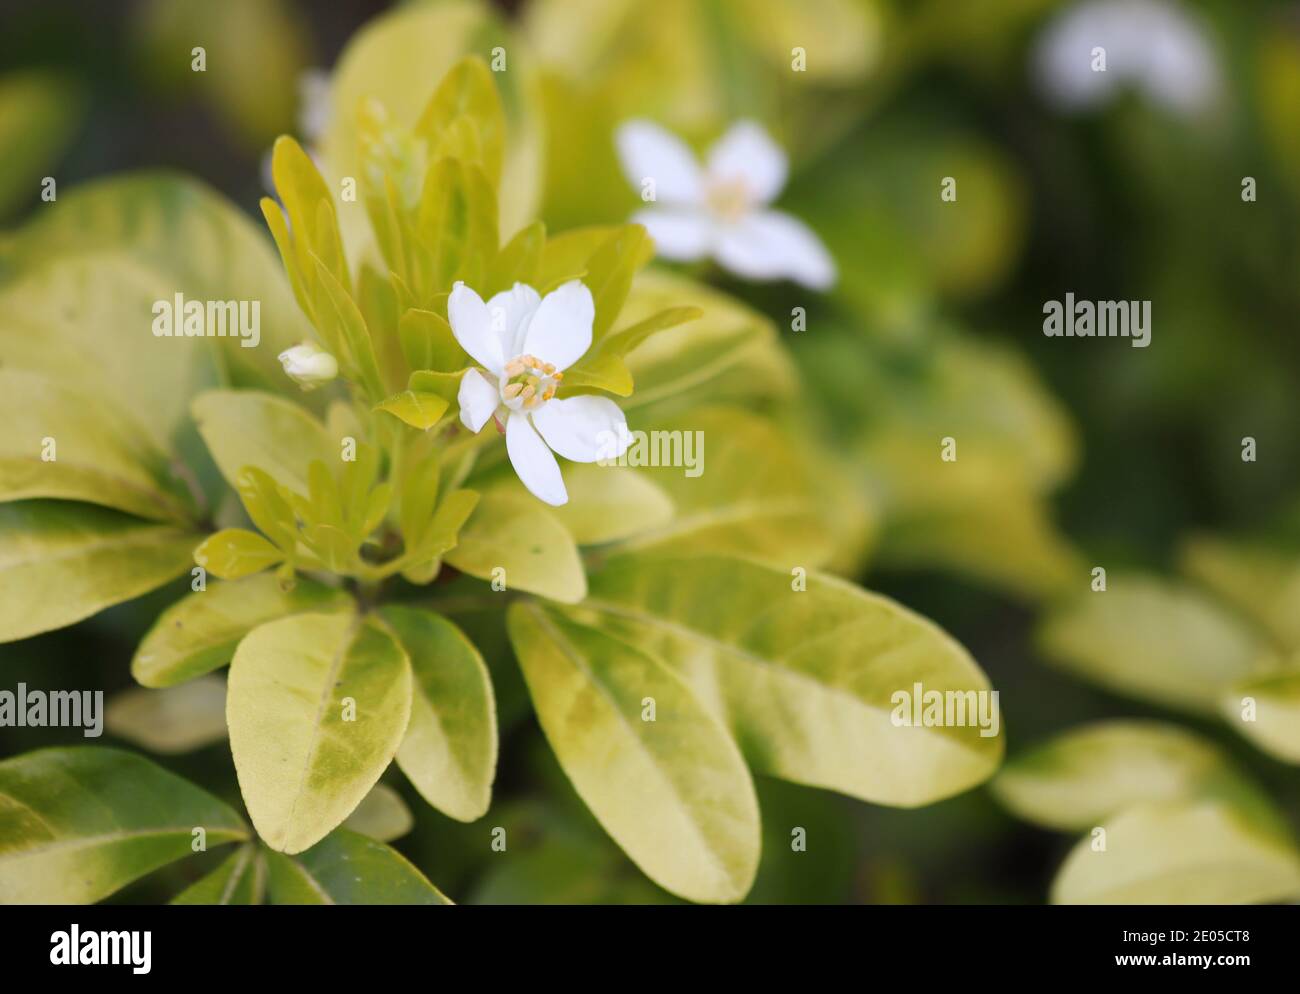 A tiny, delicate white flower blooms atop a cluster of pale green leaves. Stock Photo